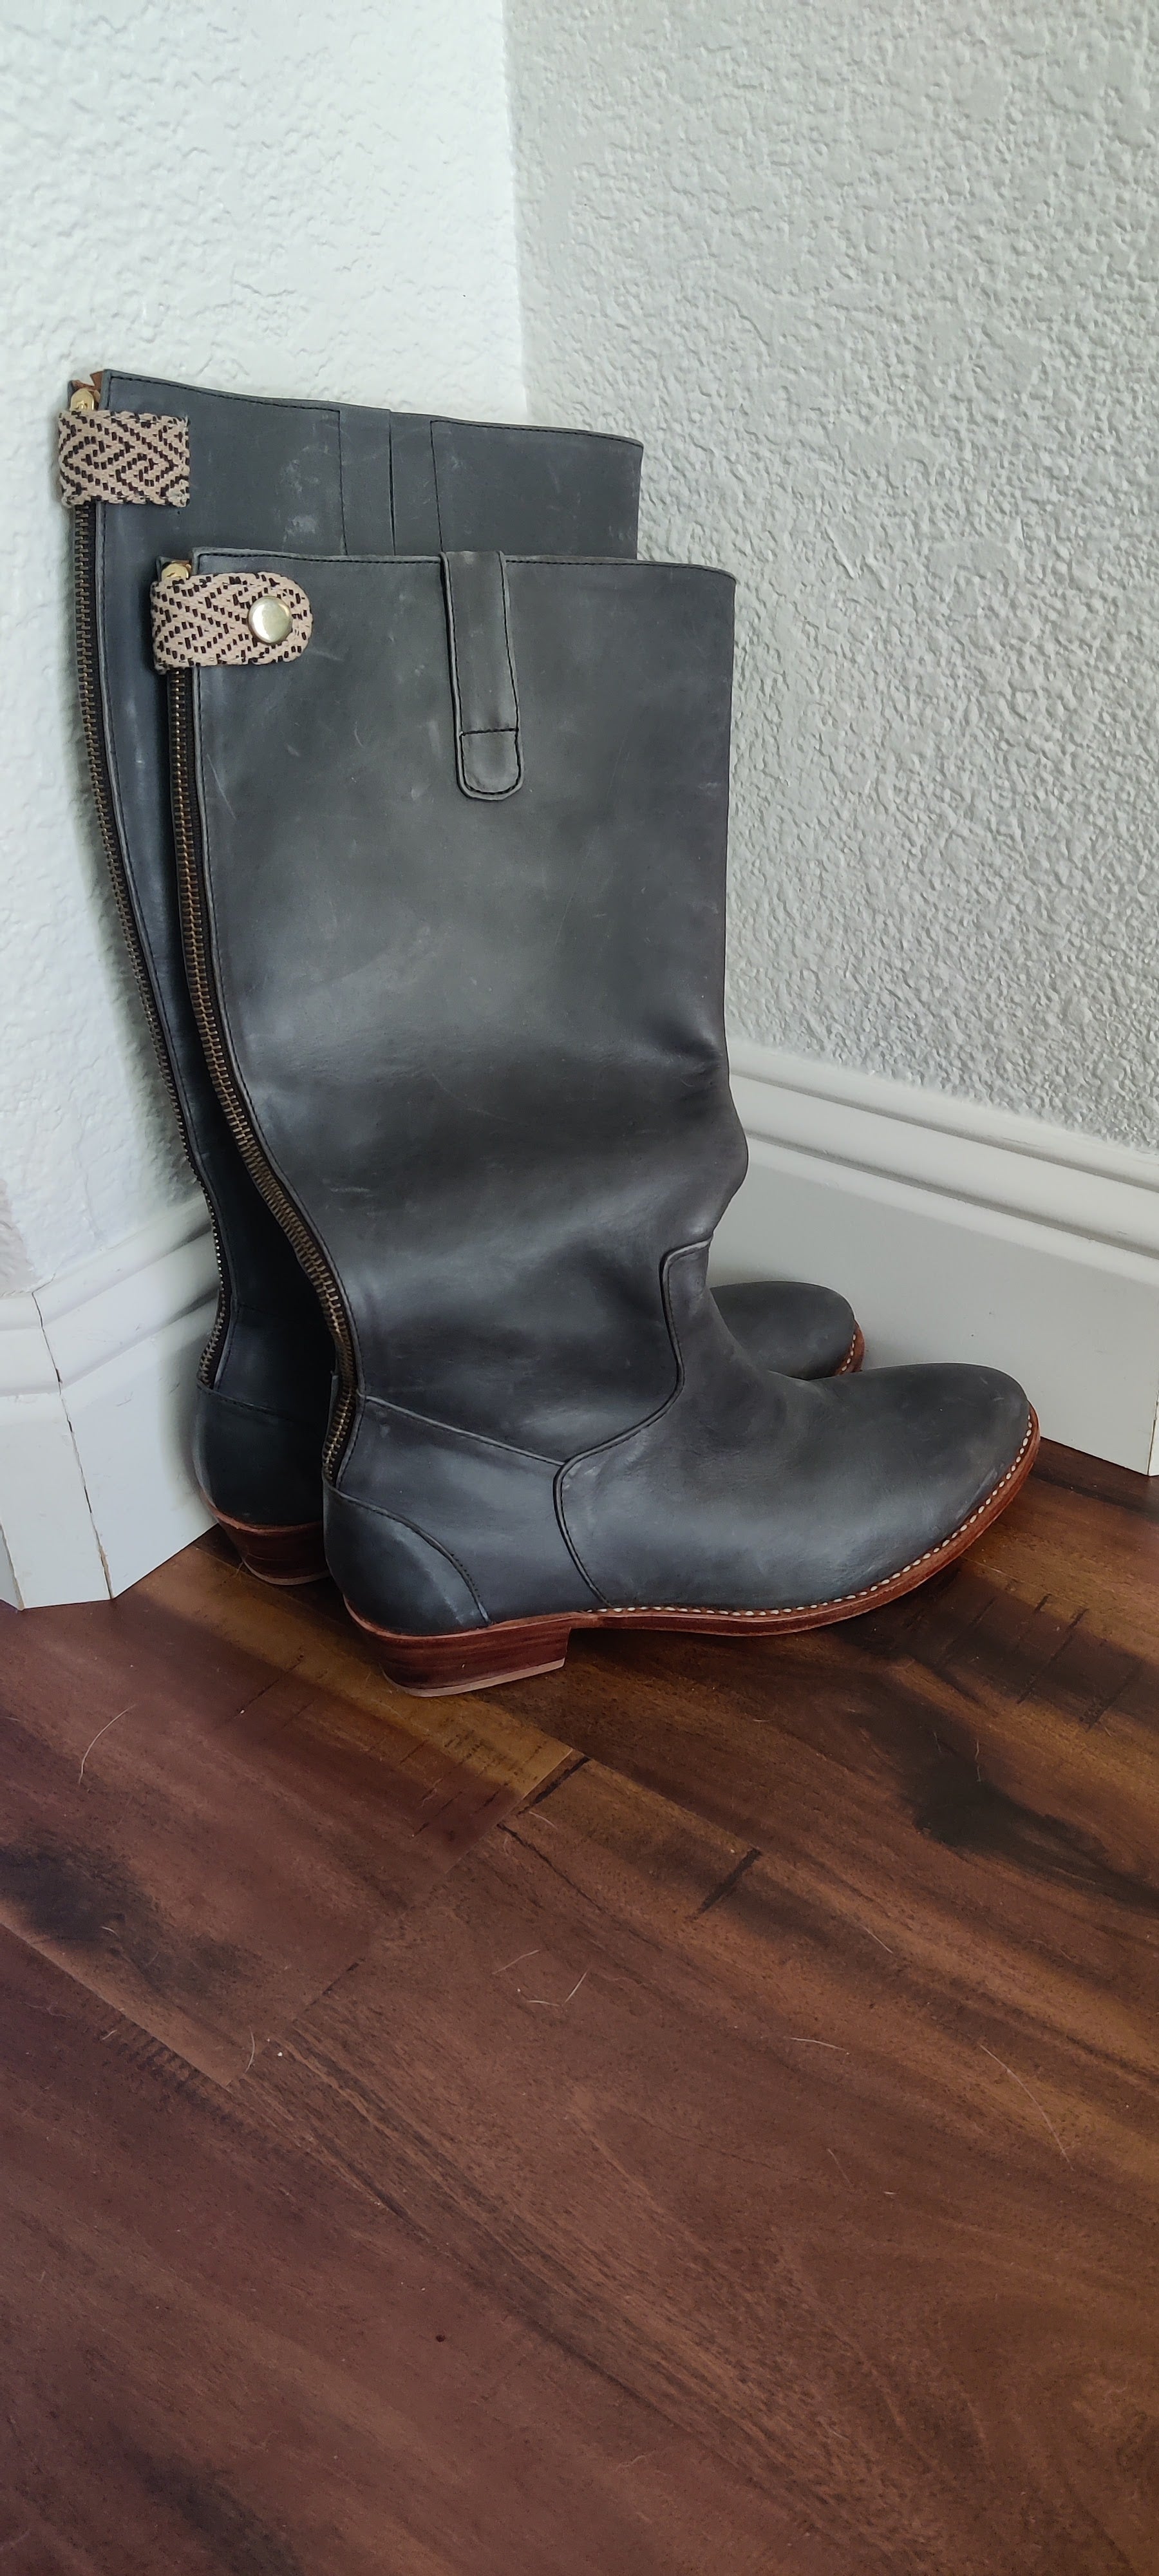 Ariana in Charcoal size 11 - Pre-loved